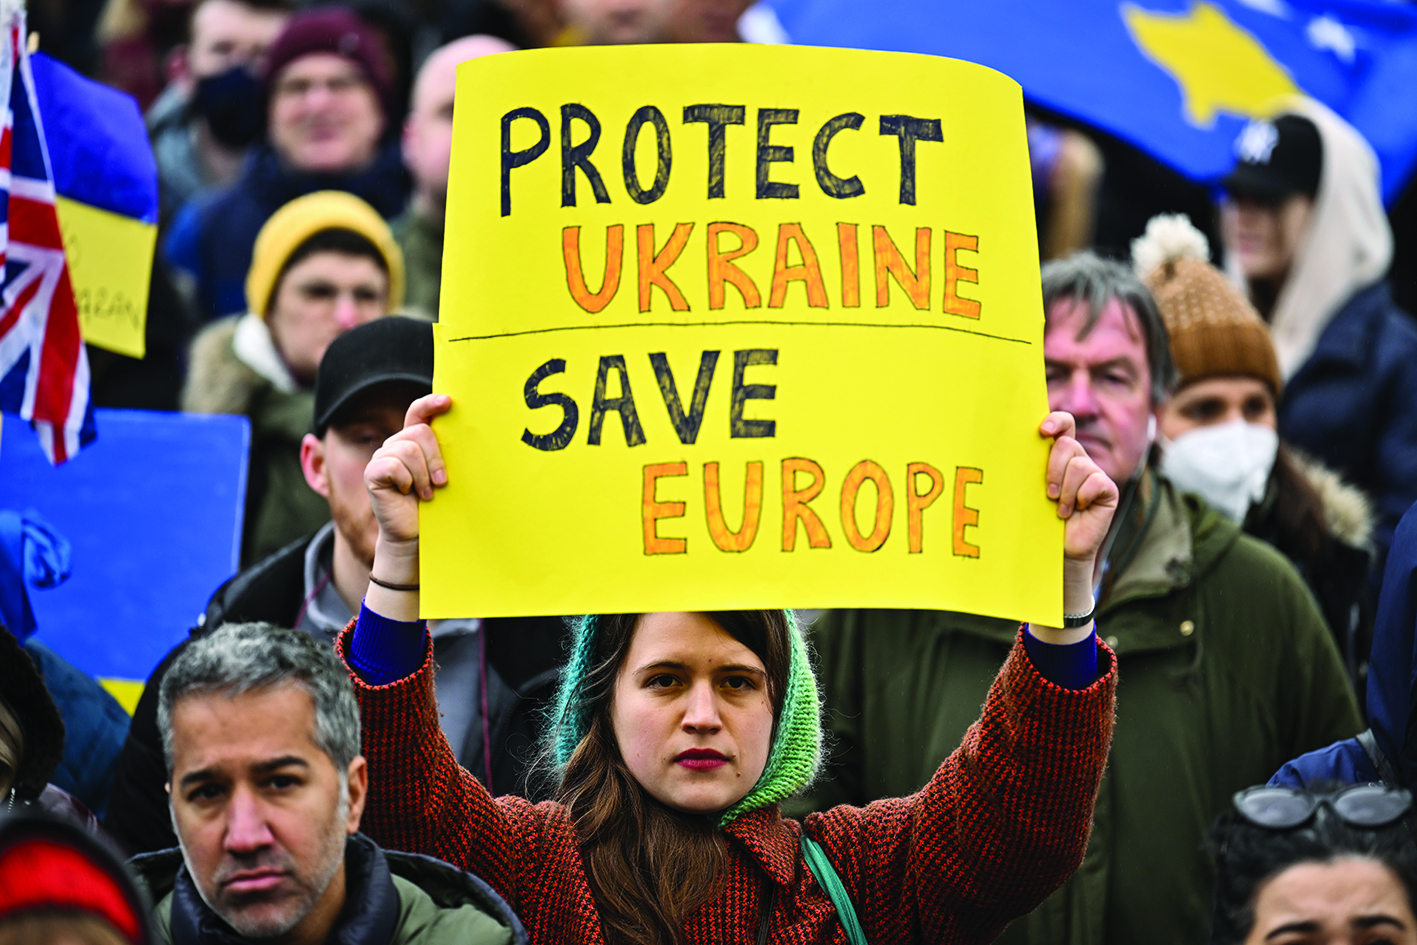 LONDON: A demonstrator holds a placard as she takes part in a rally in Trafalgar square in central London, yesterday, to show support for Ukraine and to protest against Russia's invasion of the country. - AFPn